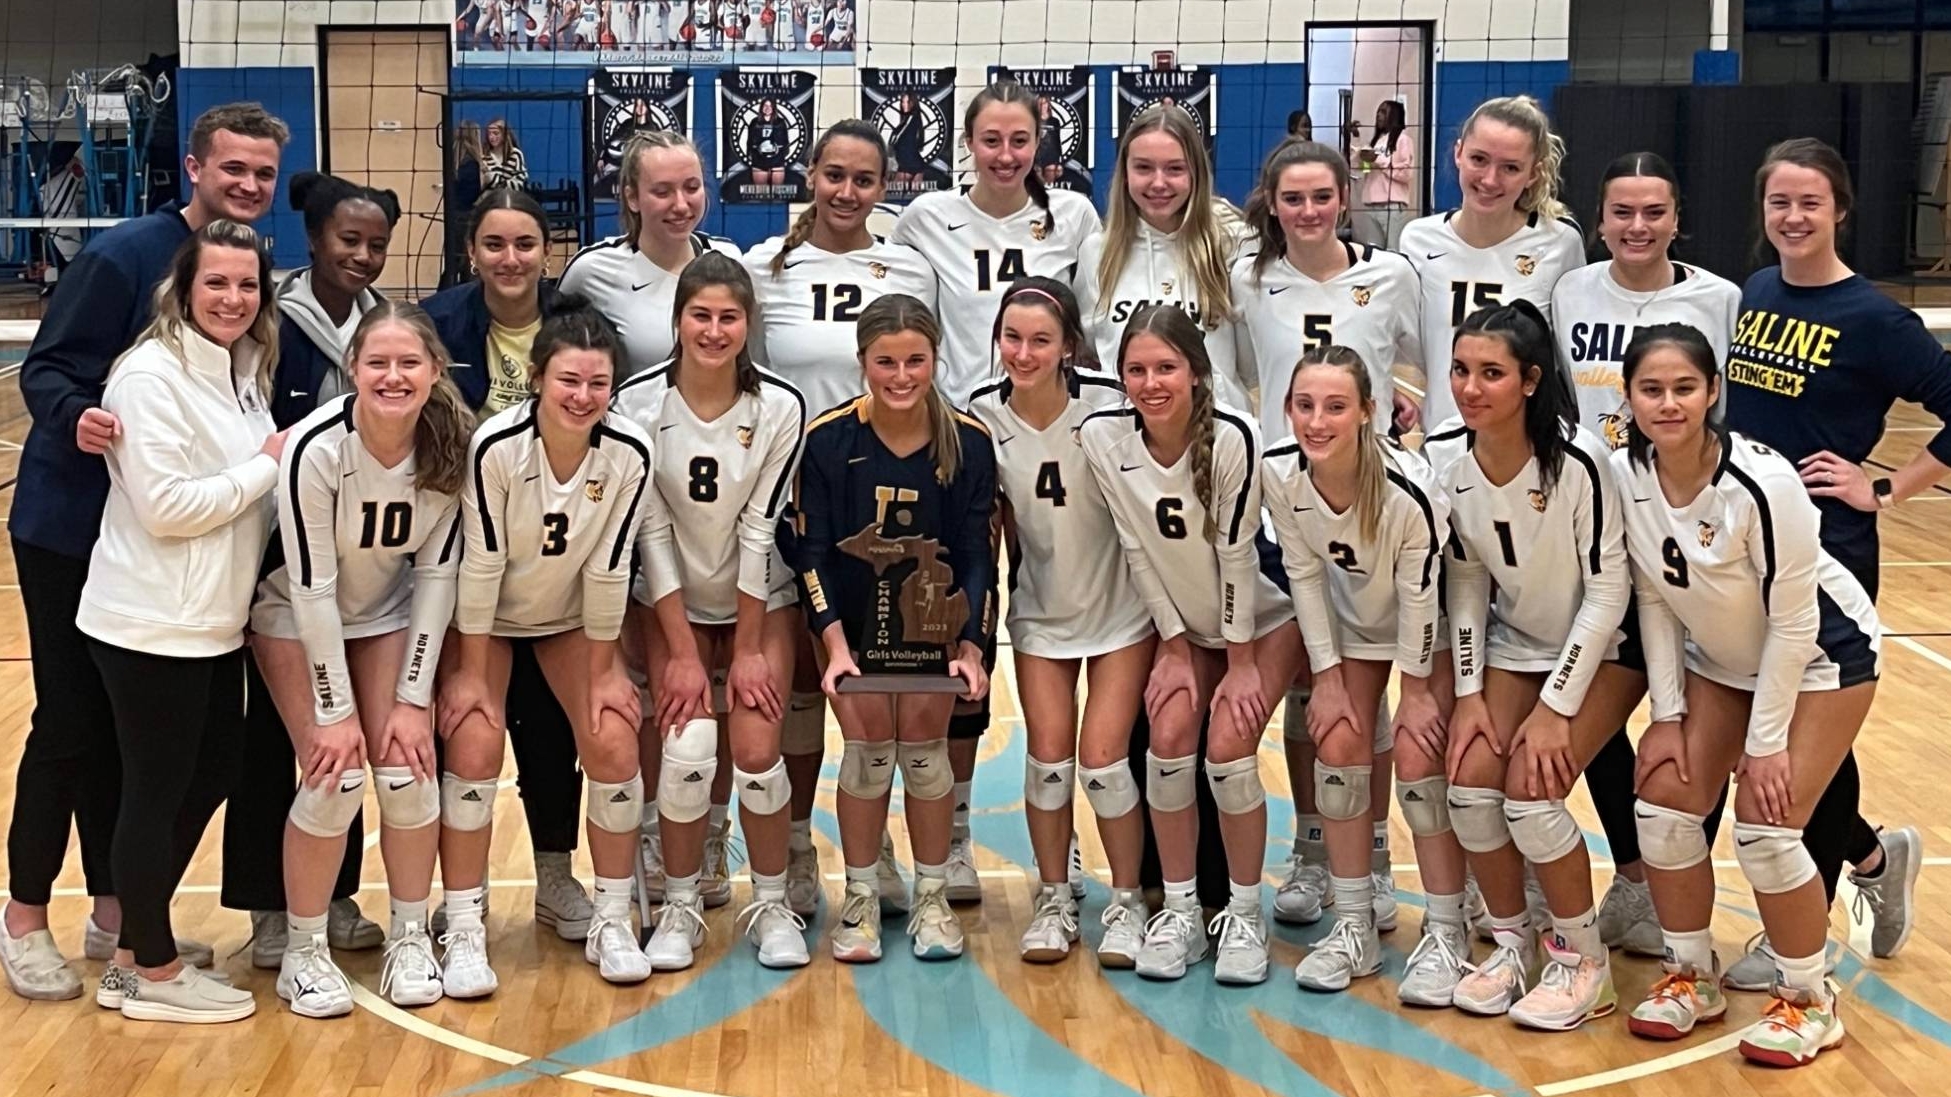 2023 District Champions - Content Image for salinehighschool_bigteams_17915